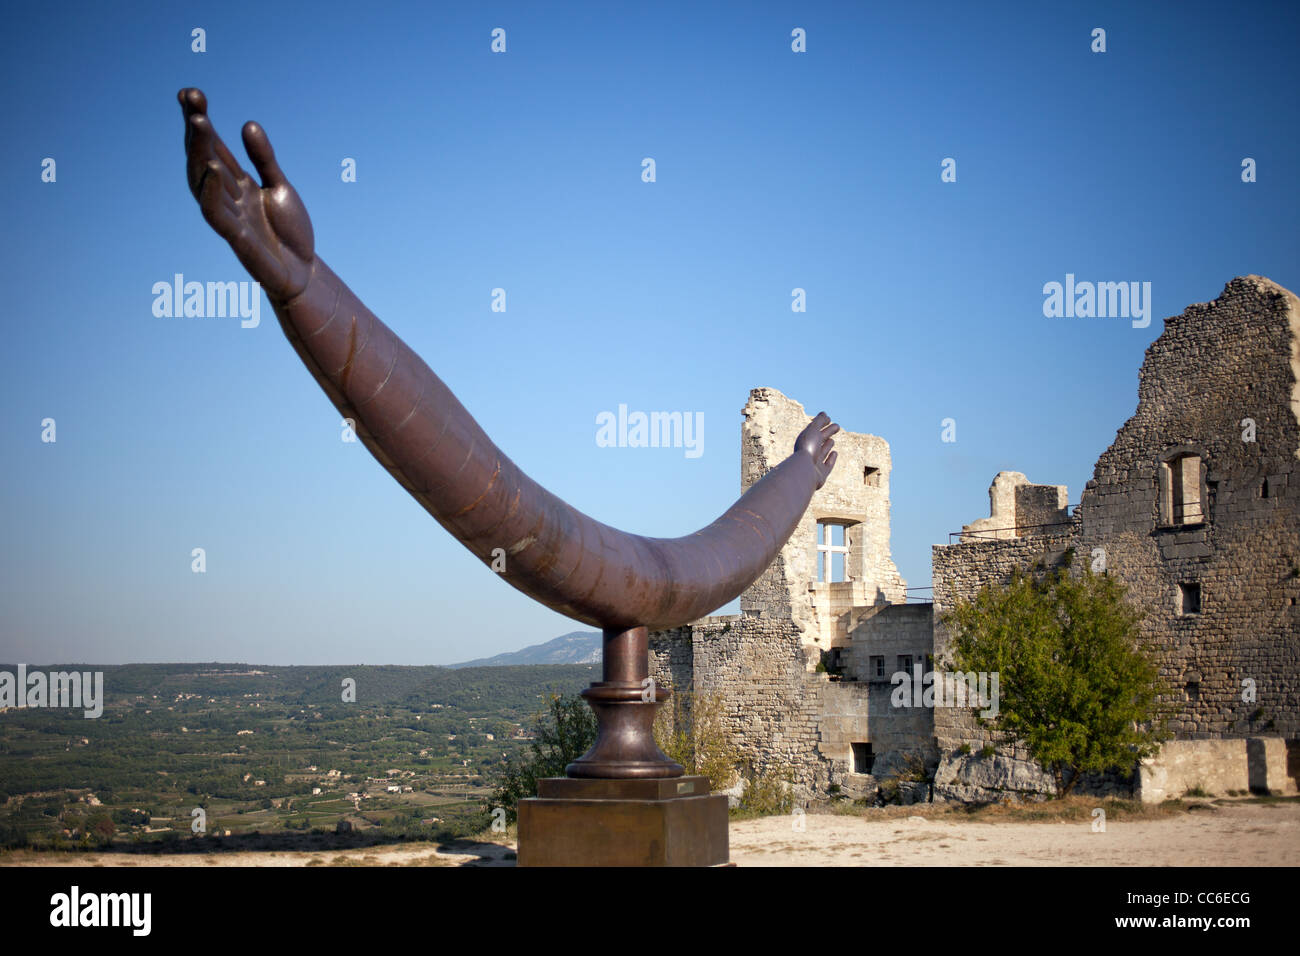 Fashion designer Pierre Cardin has installed modern sculptures next to the  ruins of Marquis de Sade's Lacoste château in France Stock Photo - Alamy